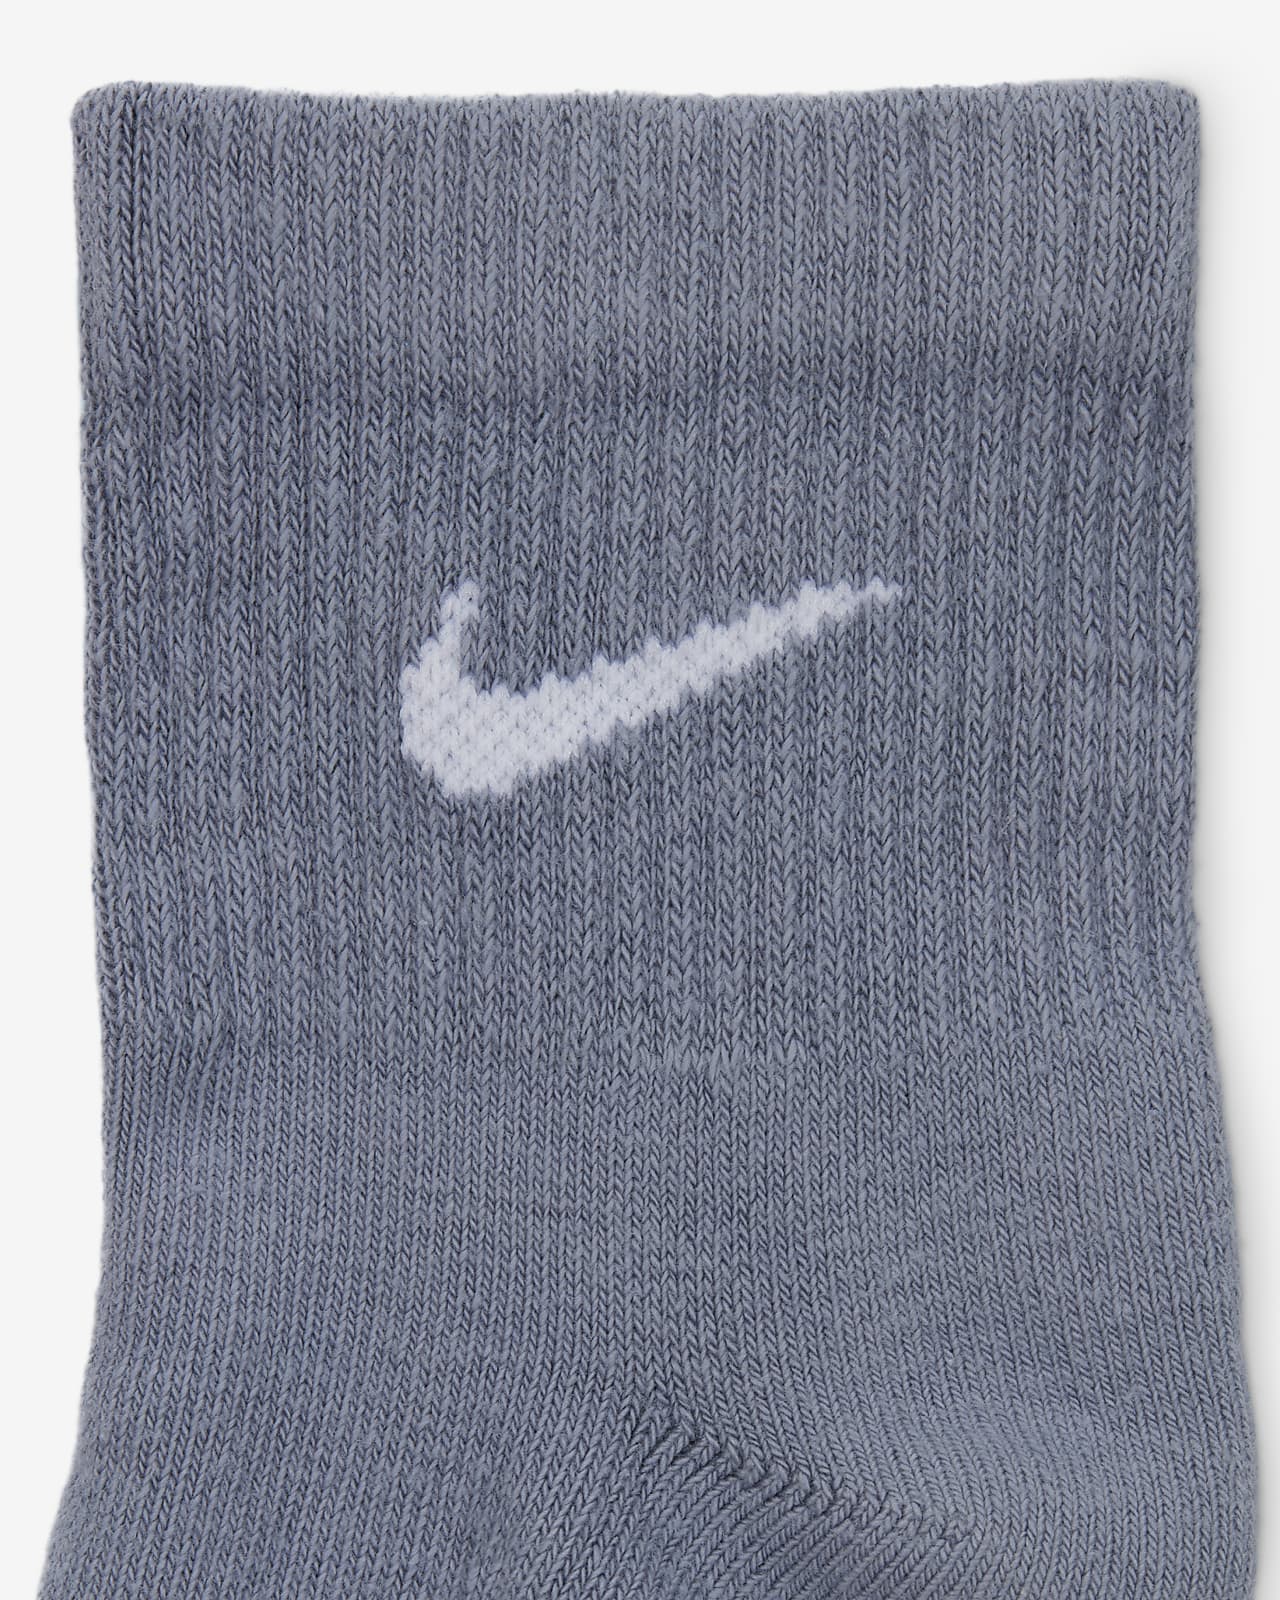 Nike Performance EVERYDAY ANKLE 3 PACK UNISEX - Chaussettes de